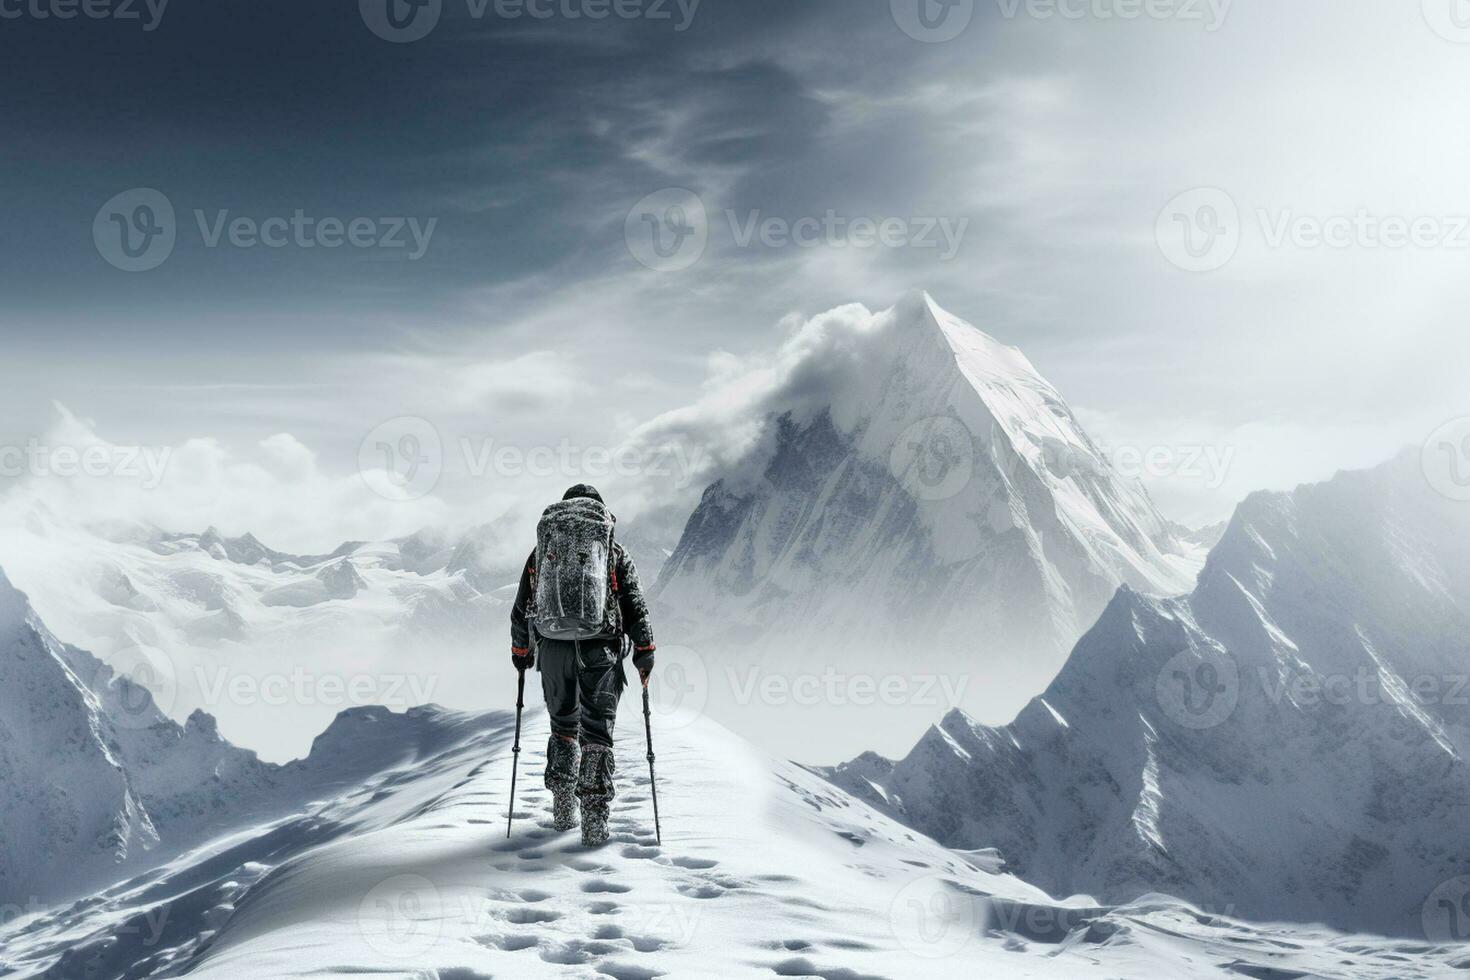 Emotion etched mountaineer resolute against harsh infinity of winter wilderness photo